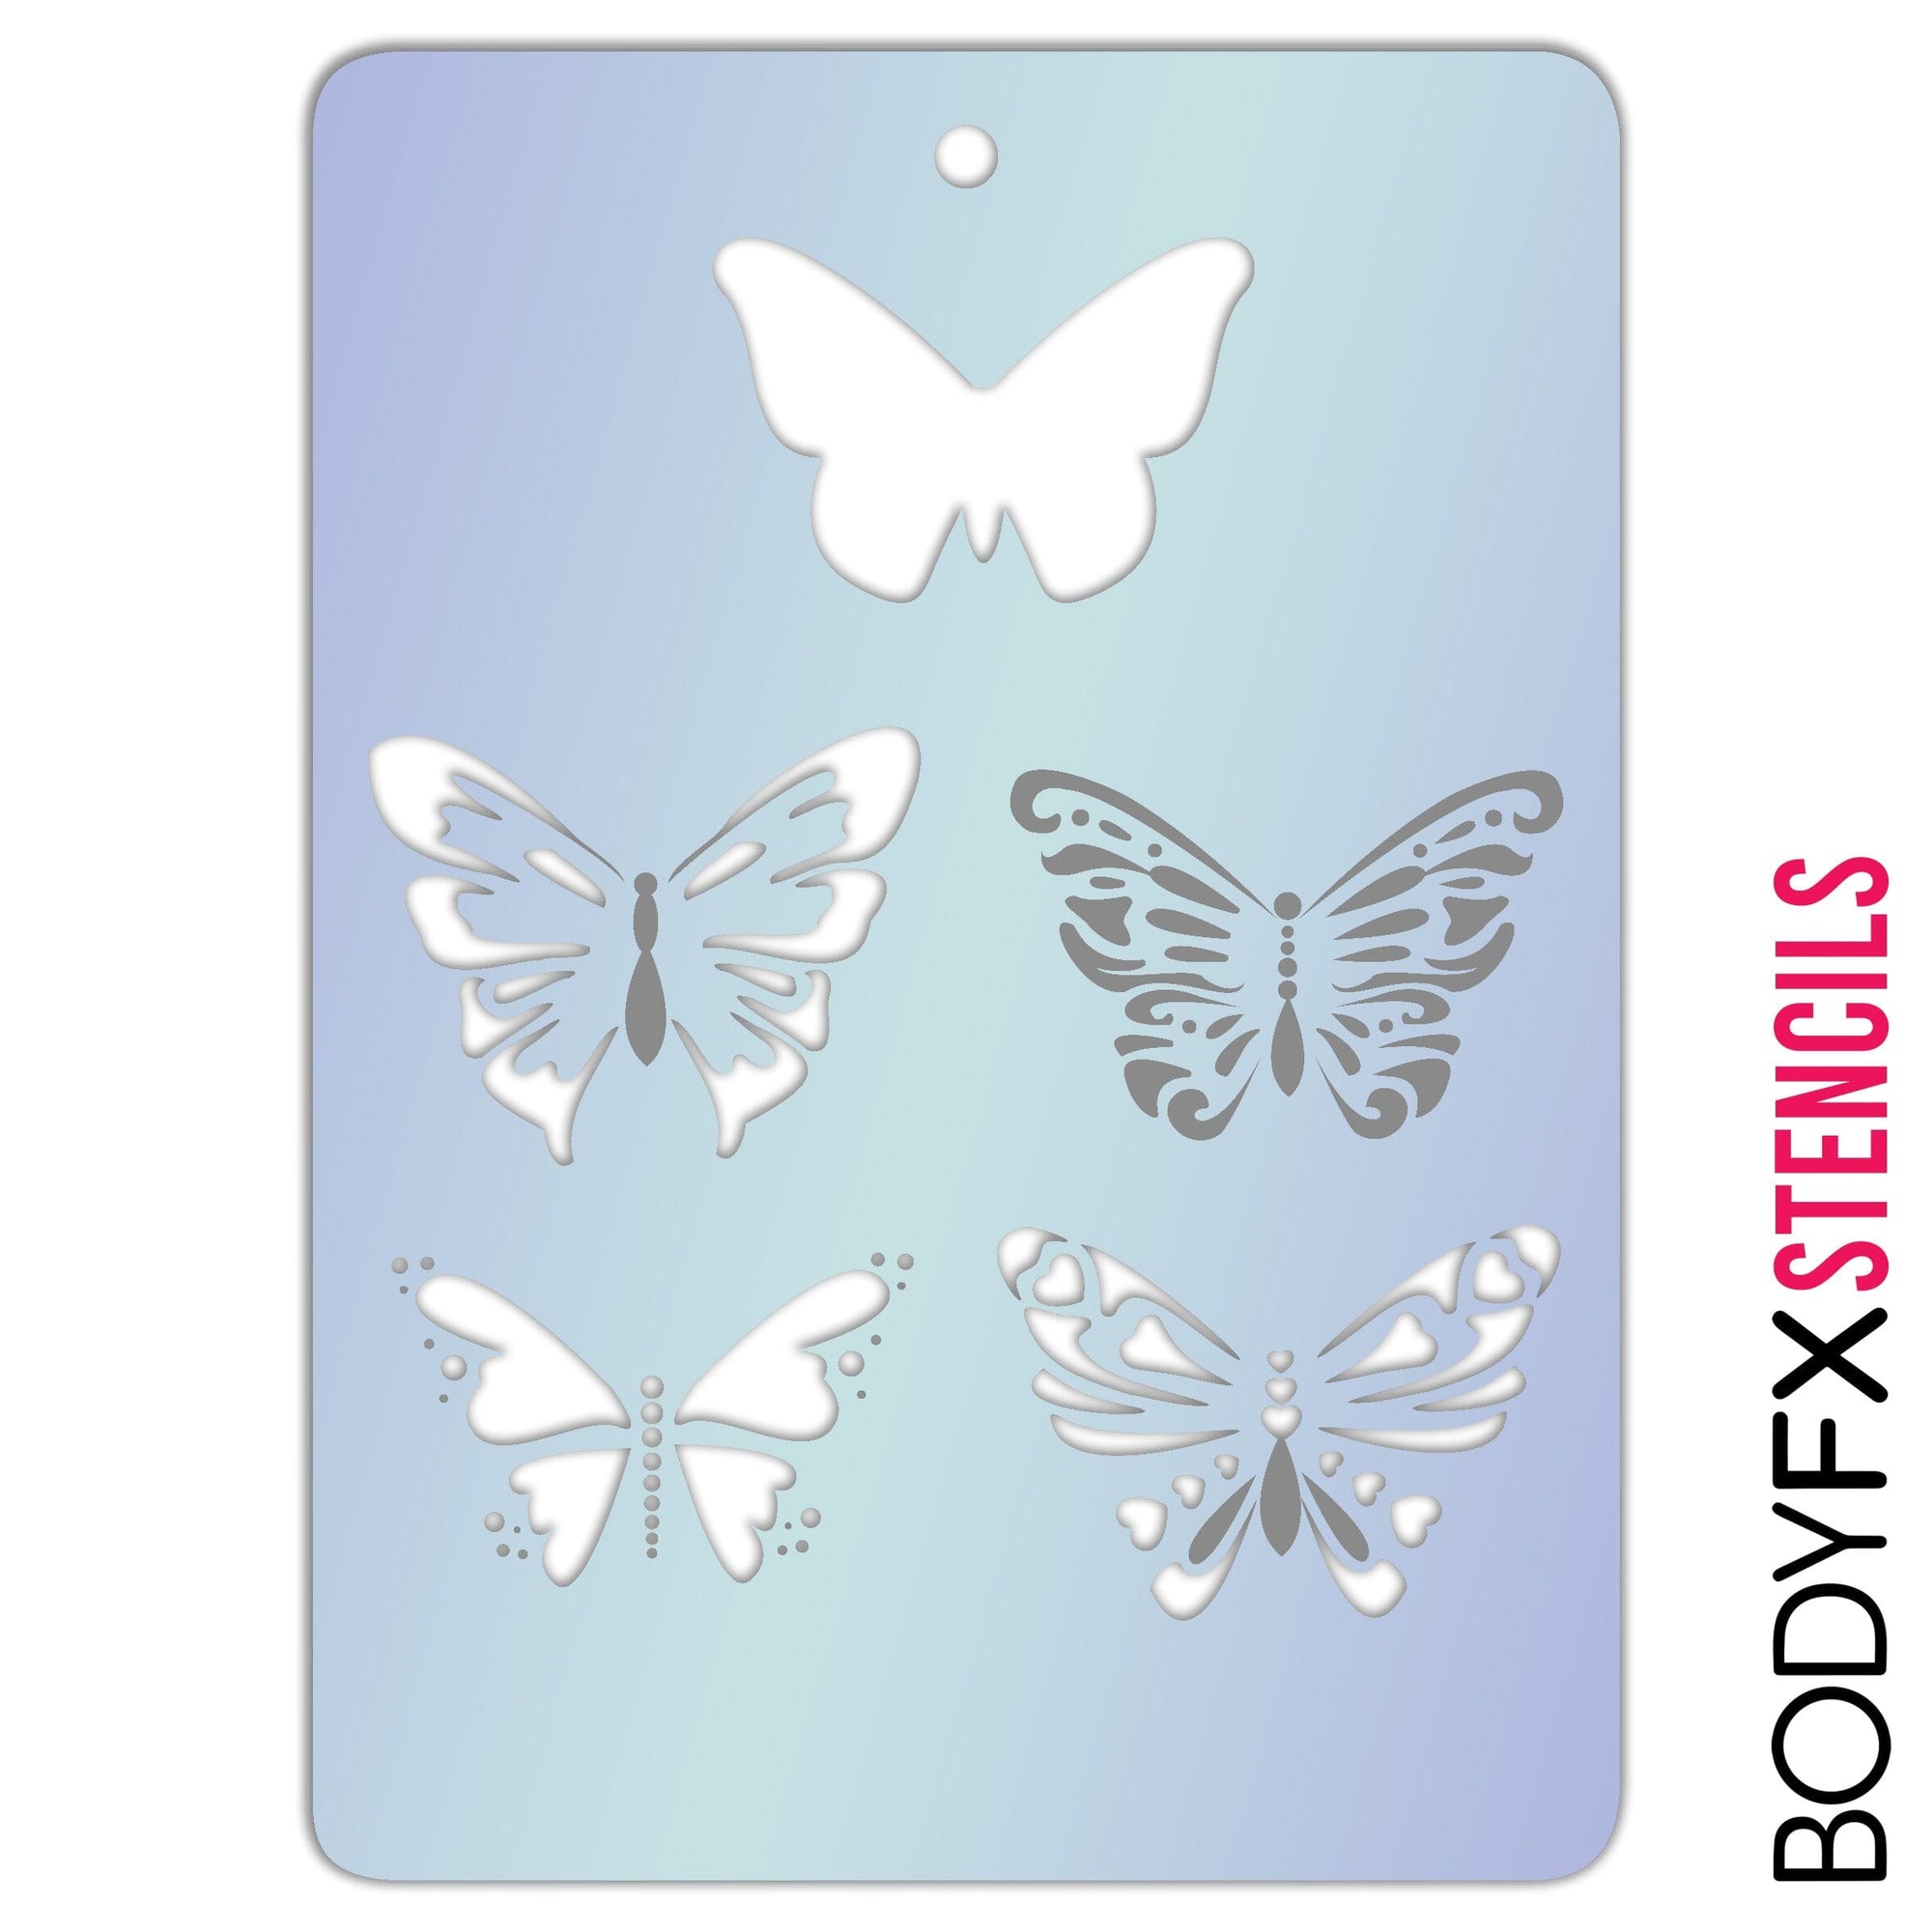 Butterfly Layer Stencil